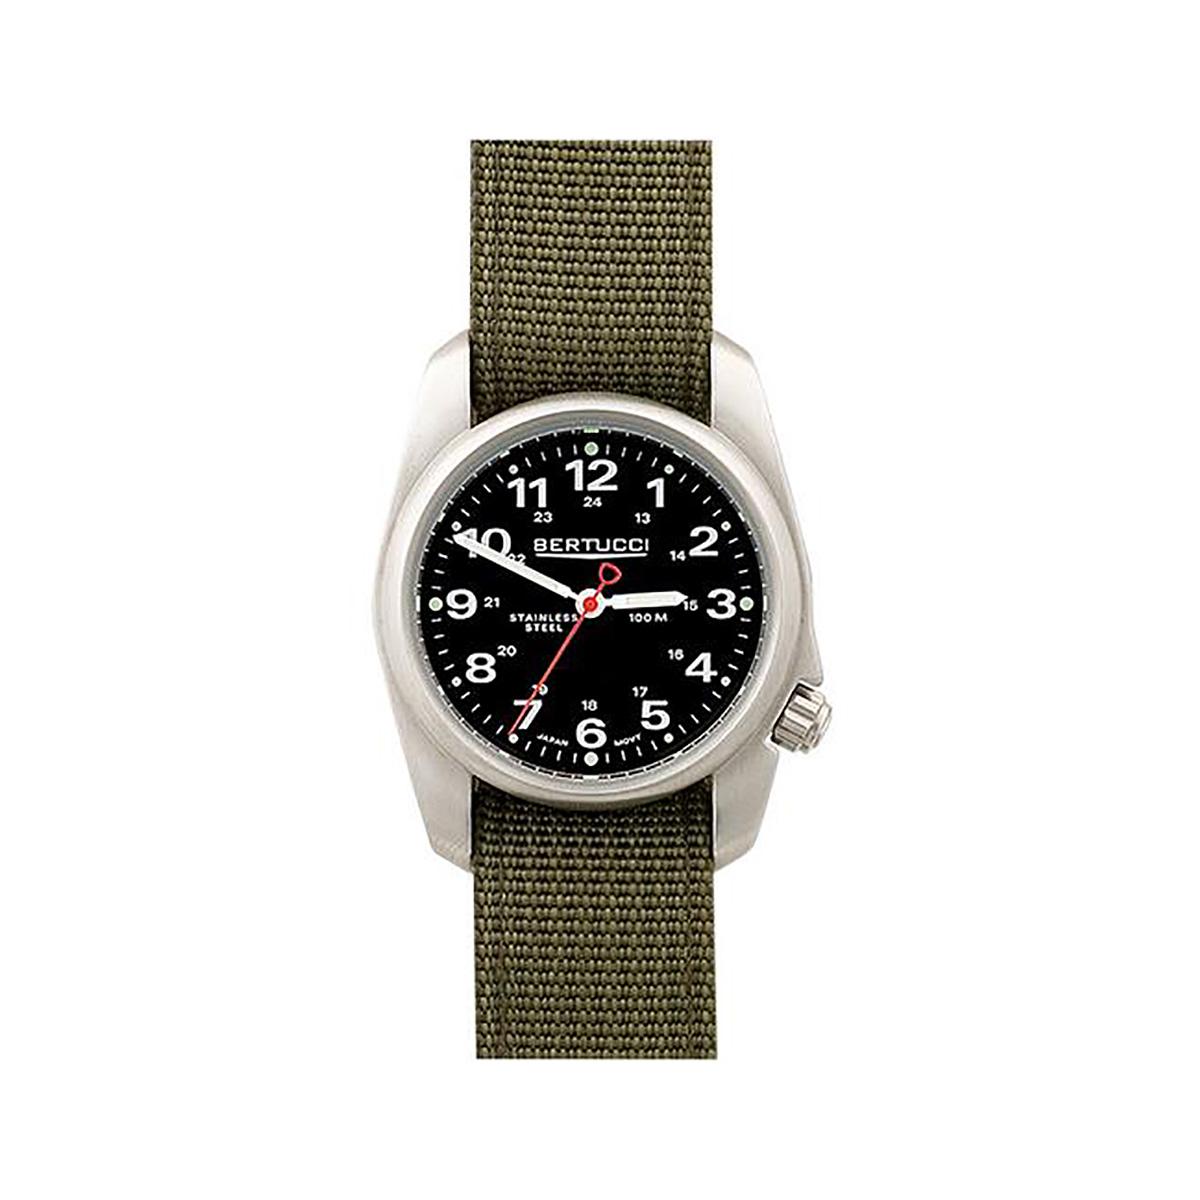 NOSO In The Field Patch - Olive Drab Green - Great Outdoor Shop